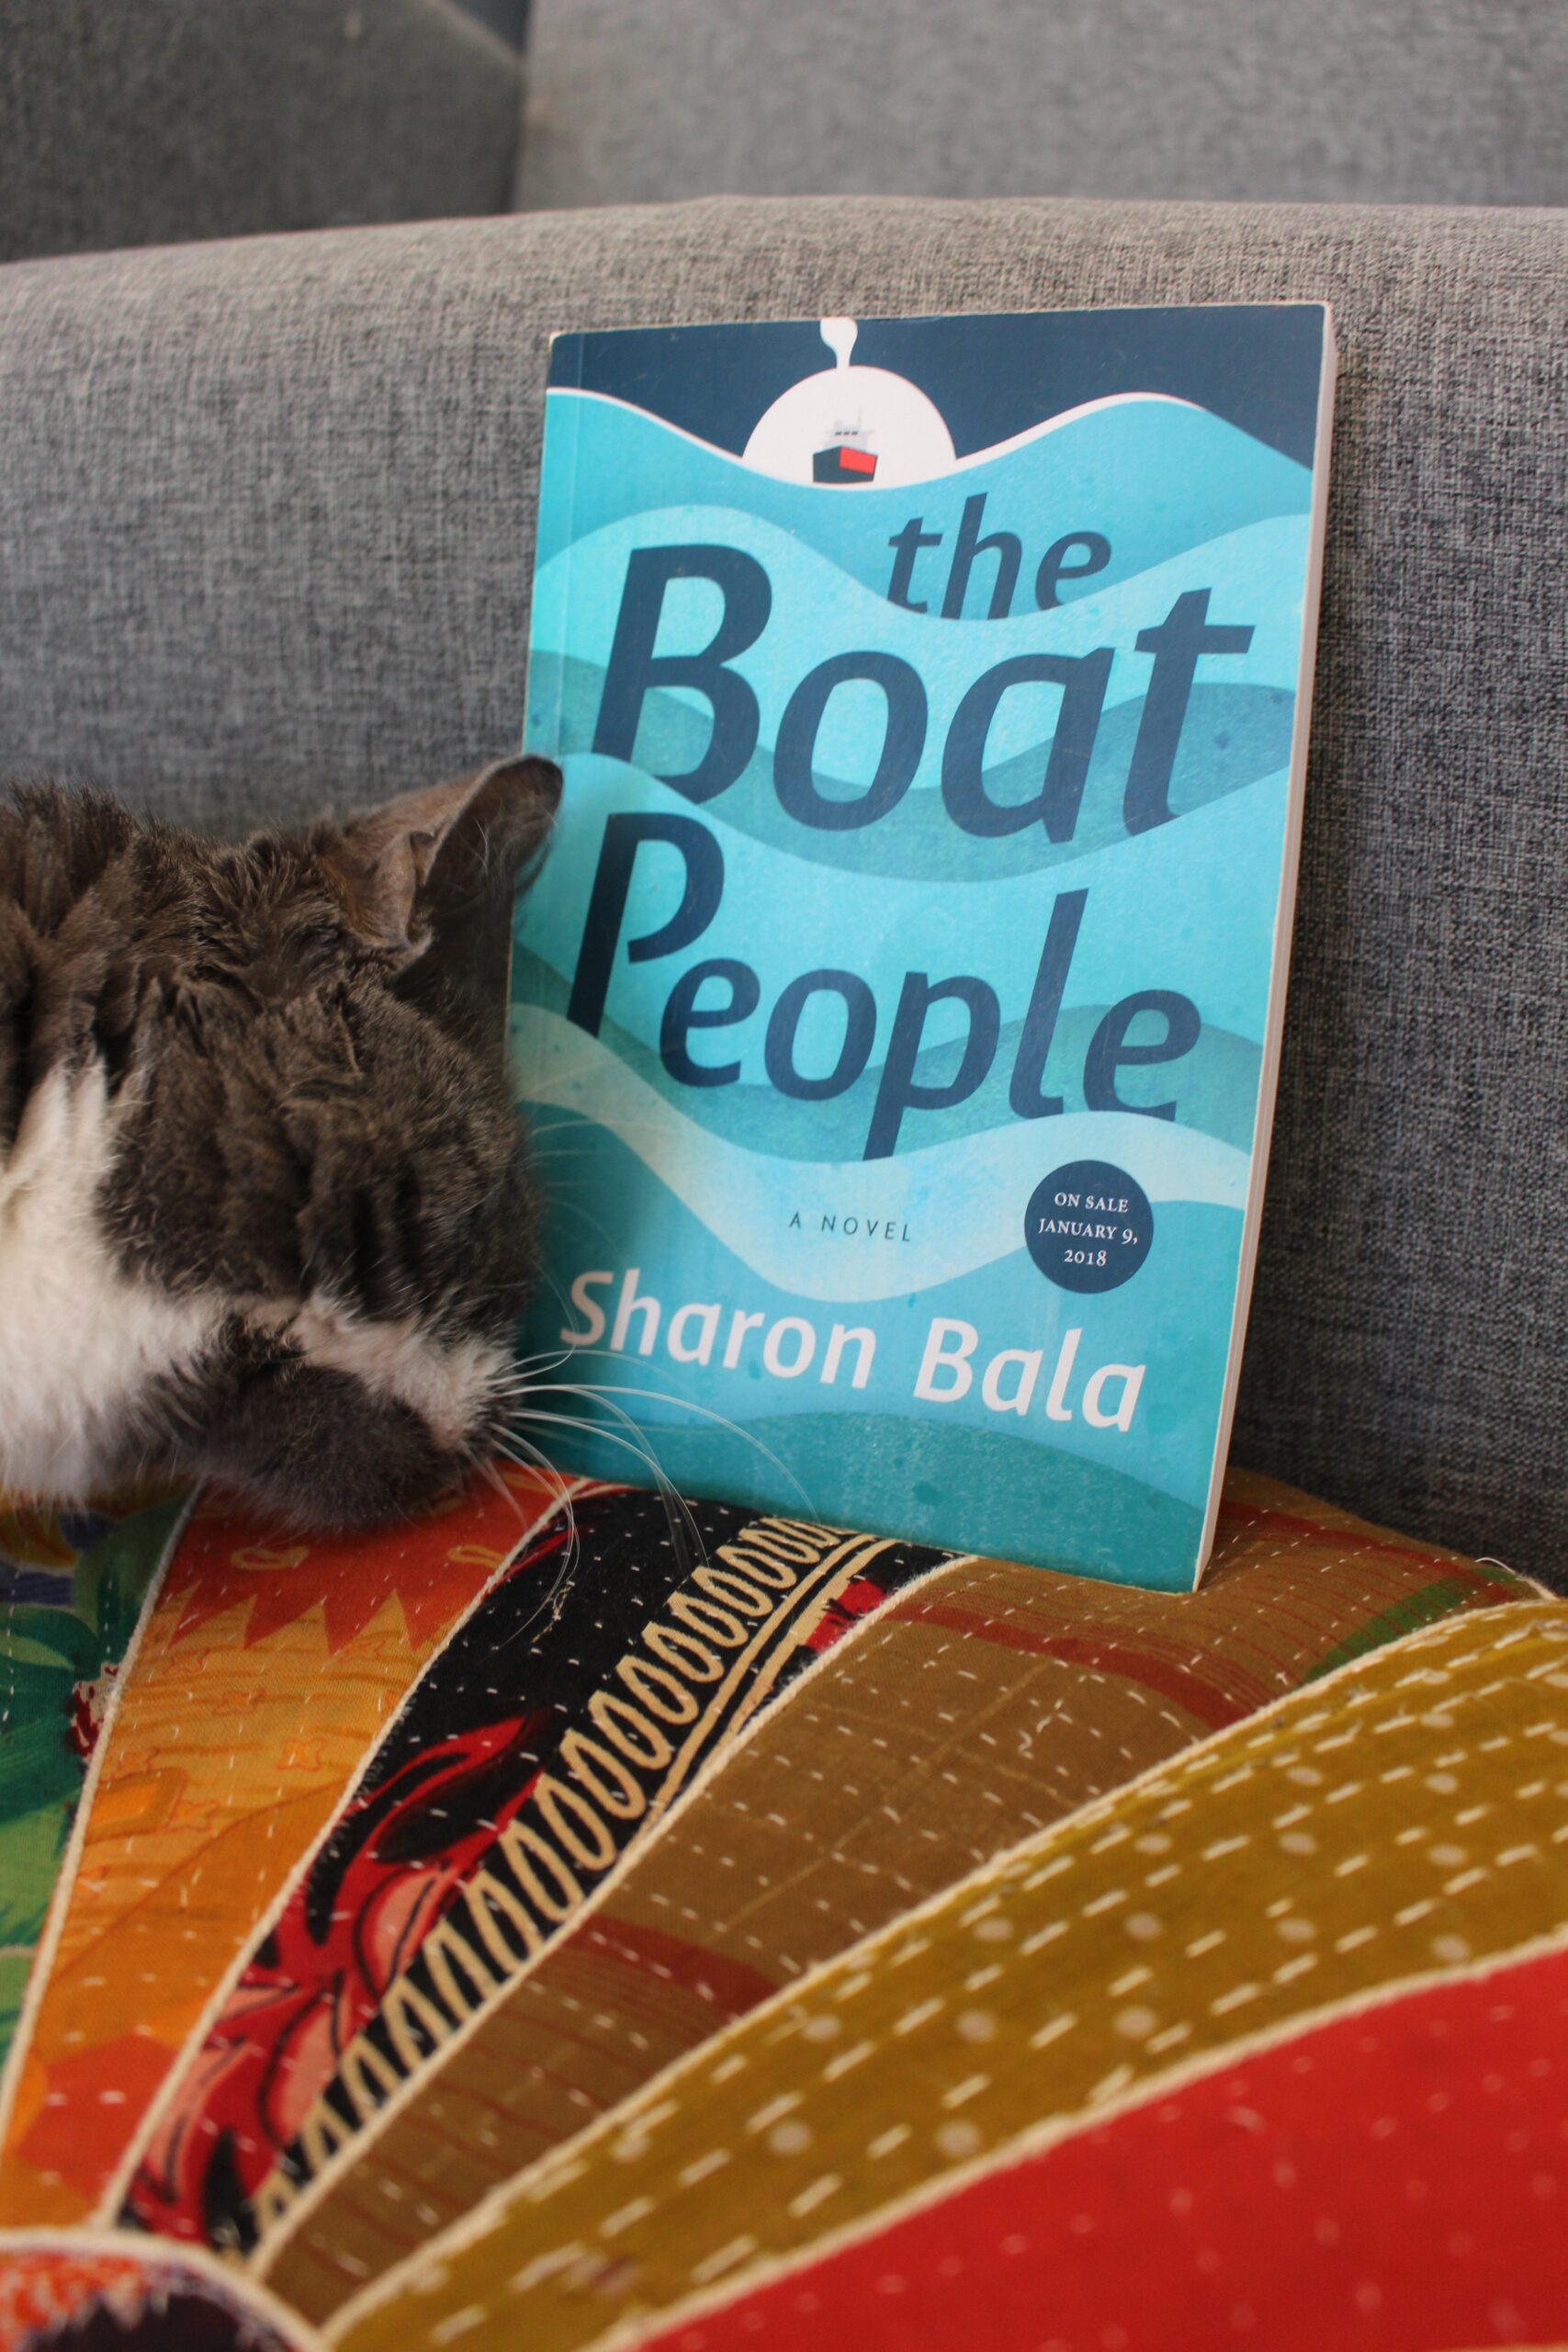 The Boat People by Sharon Bala book pictured on a cushion with a cat's head nuzzling it